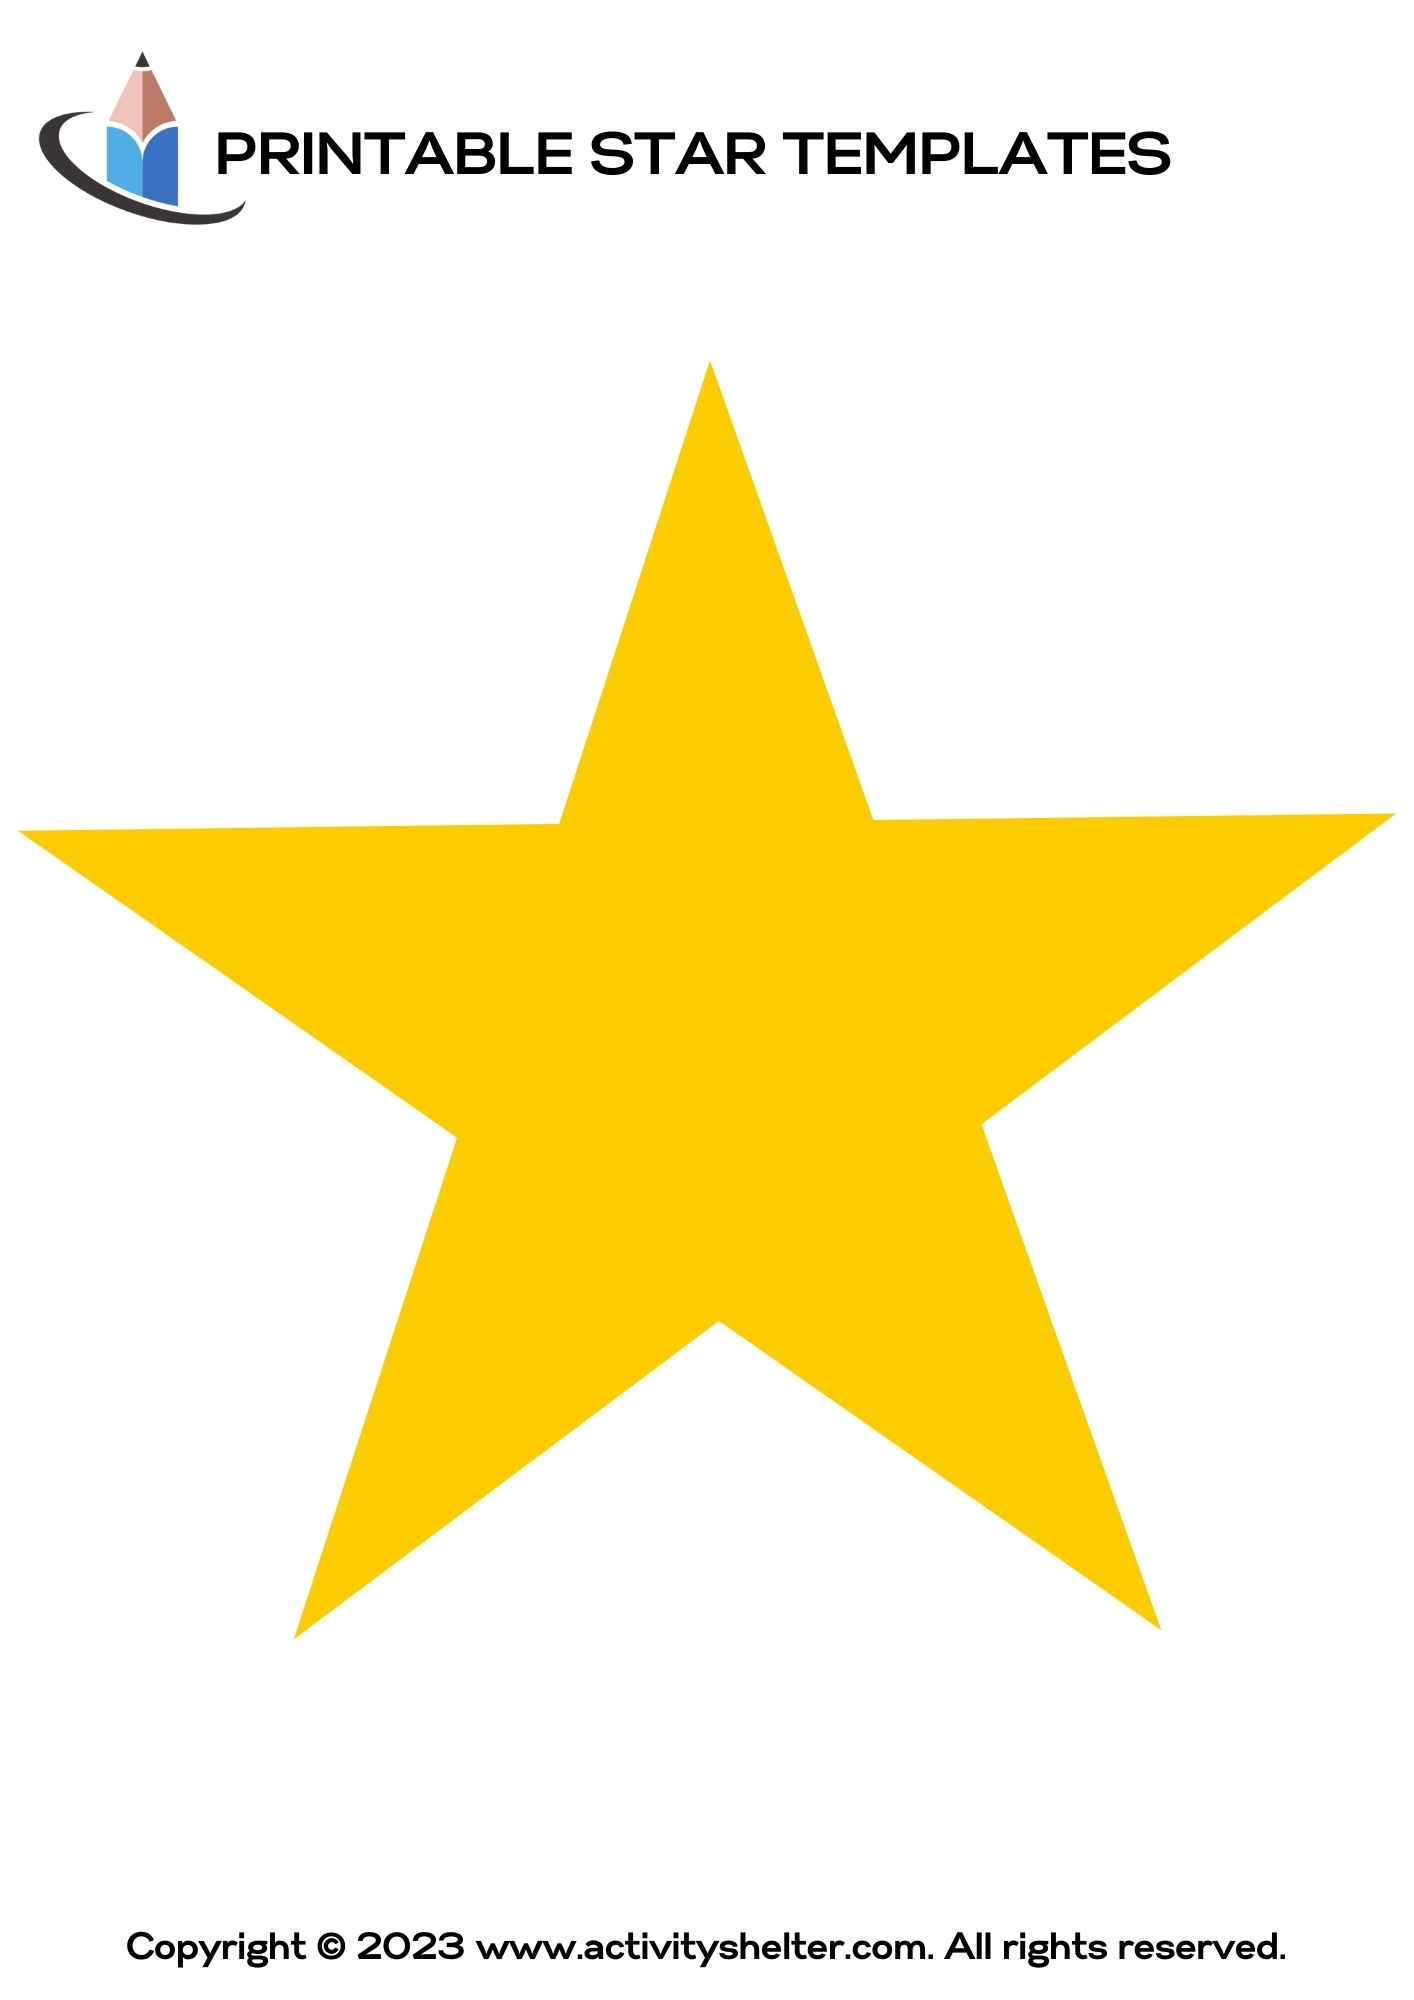 5 Pointed Star Template Free Printable with Yellow Star